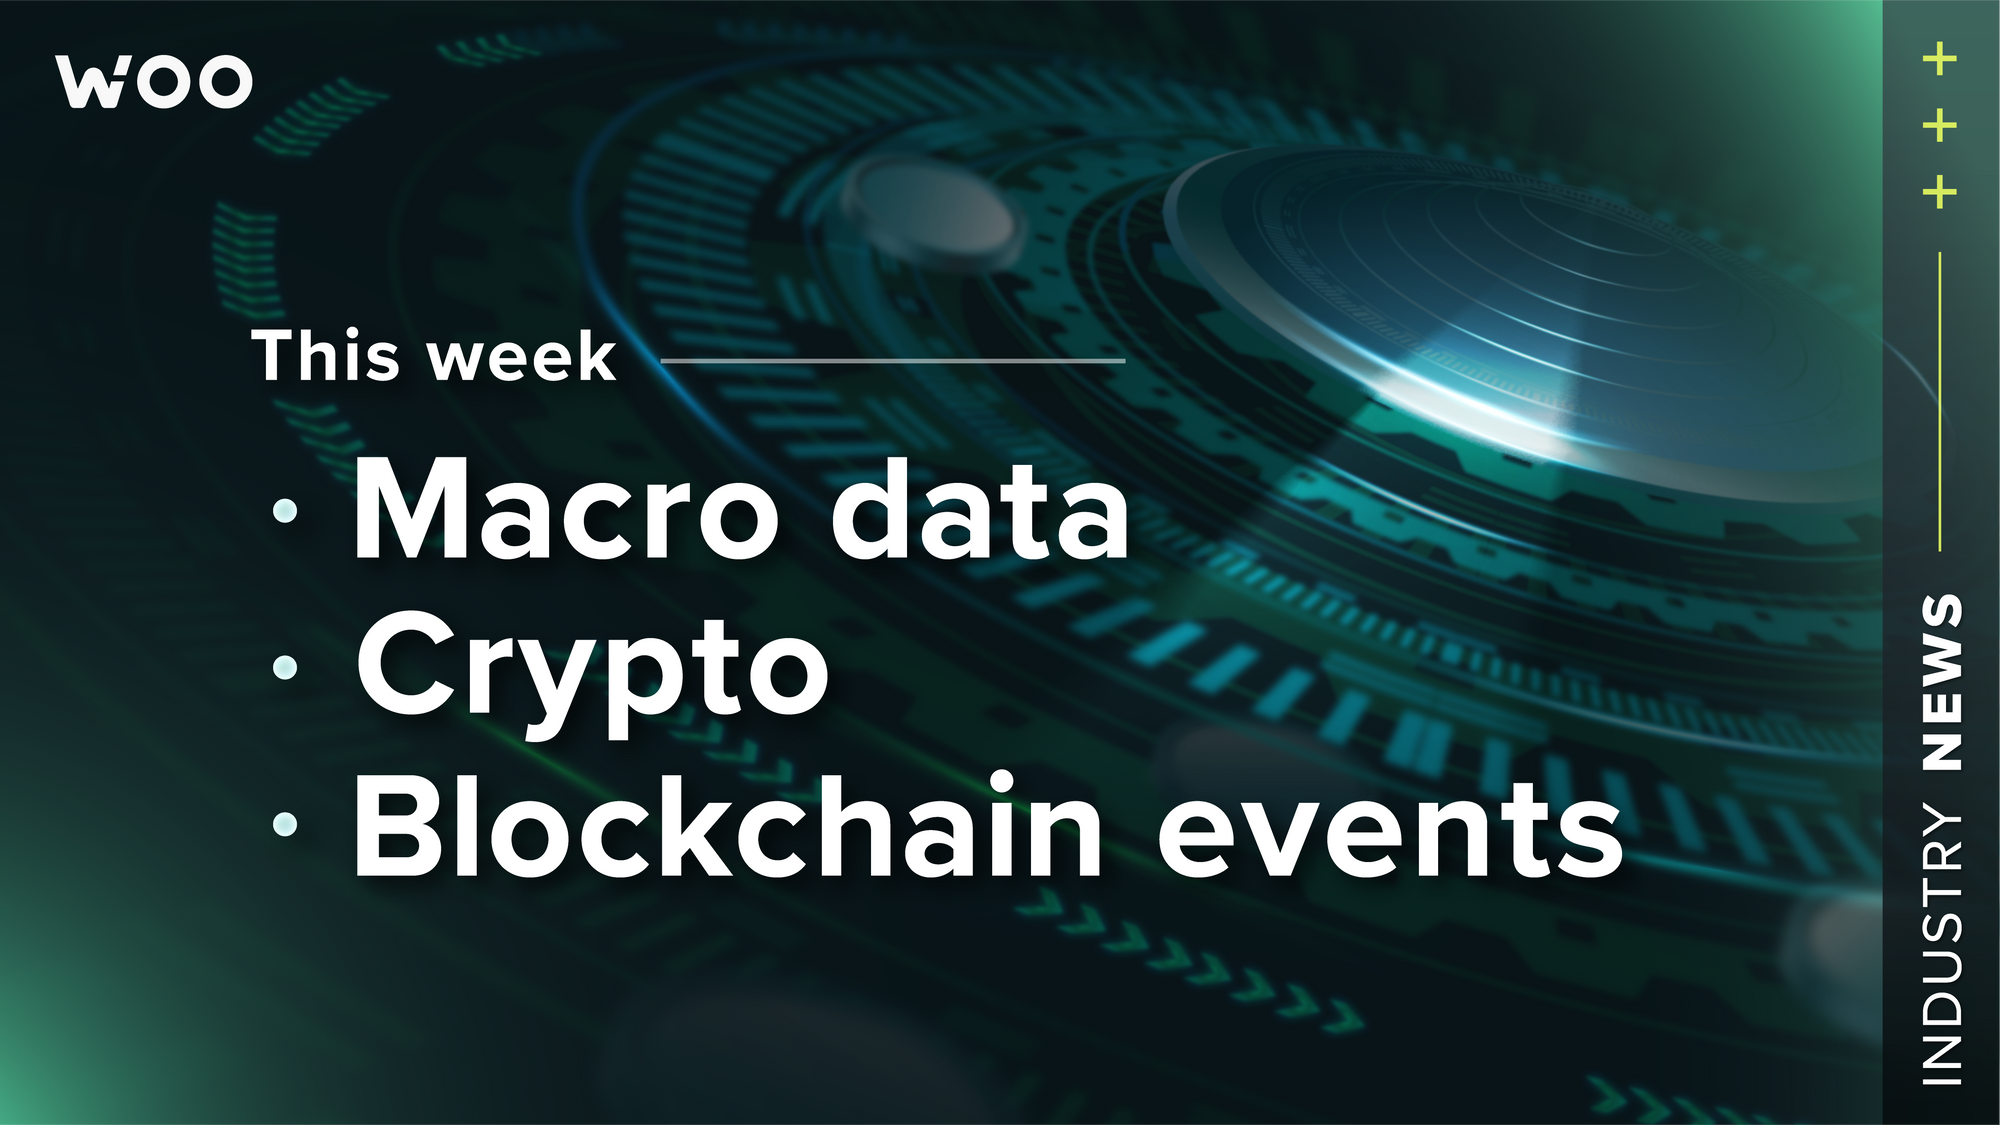 Macro data, crypto, and blockchain events this week